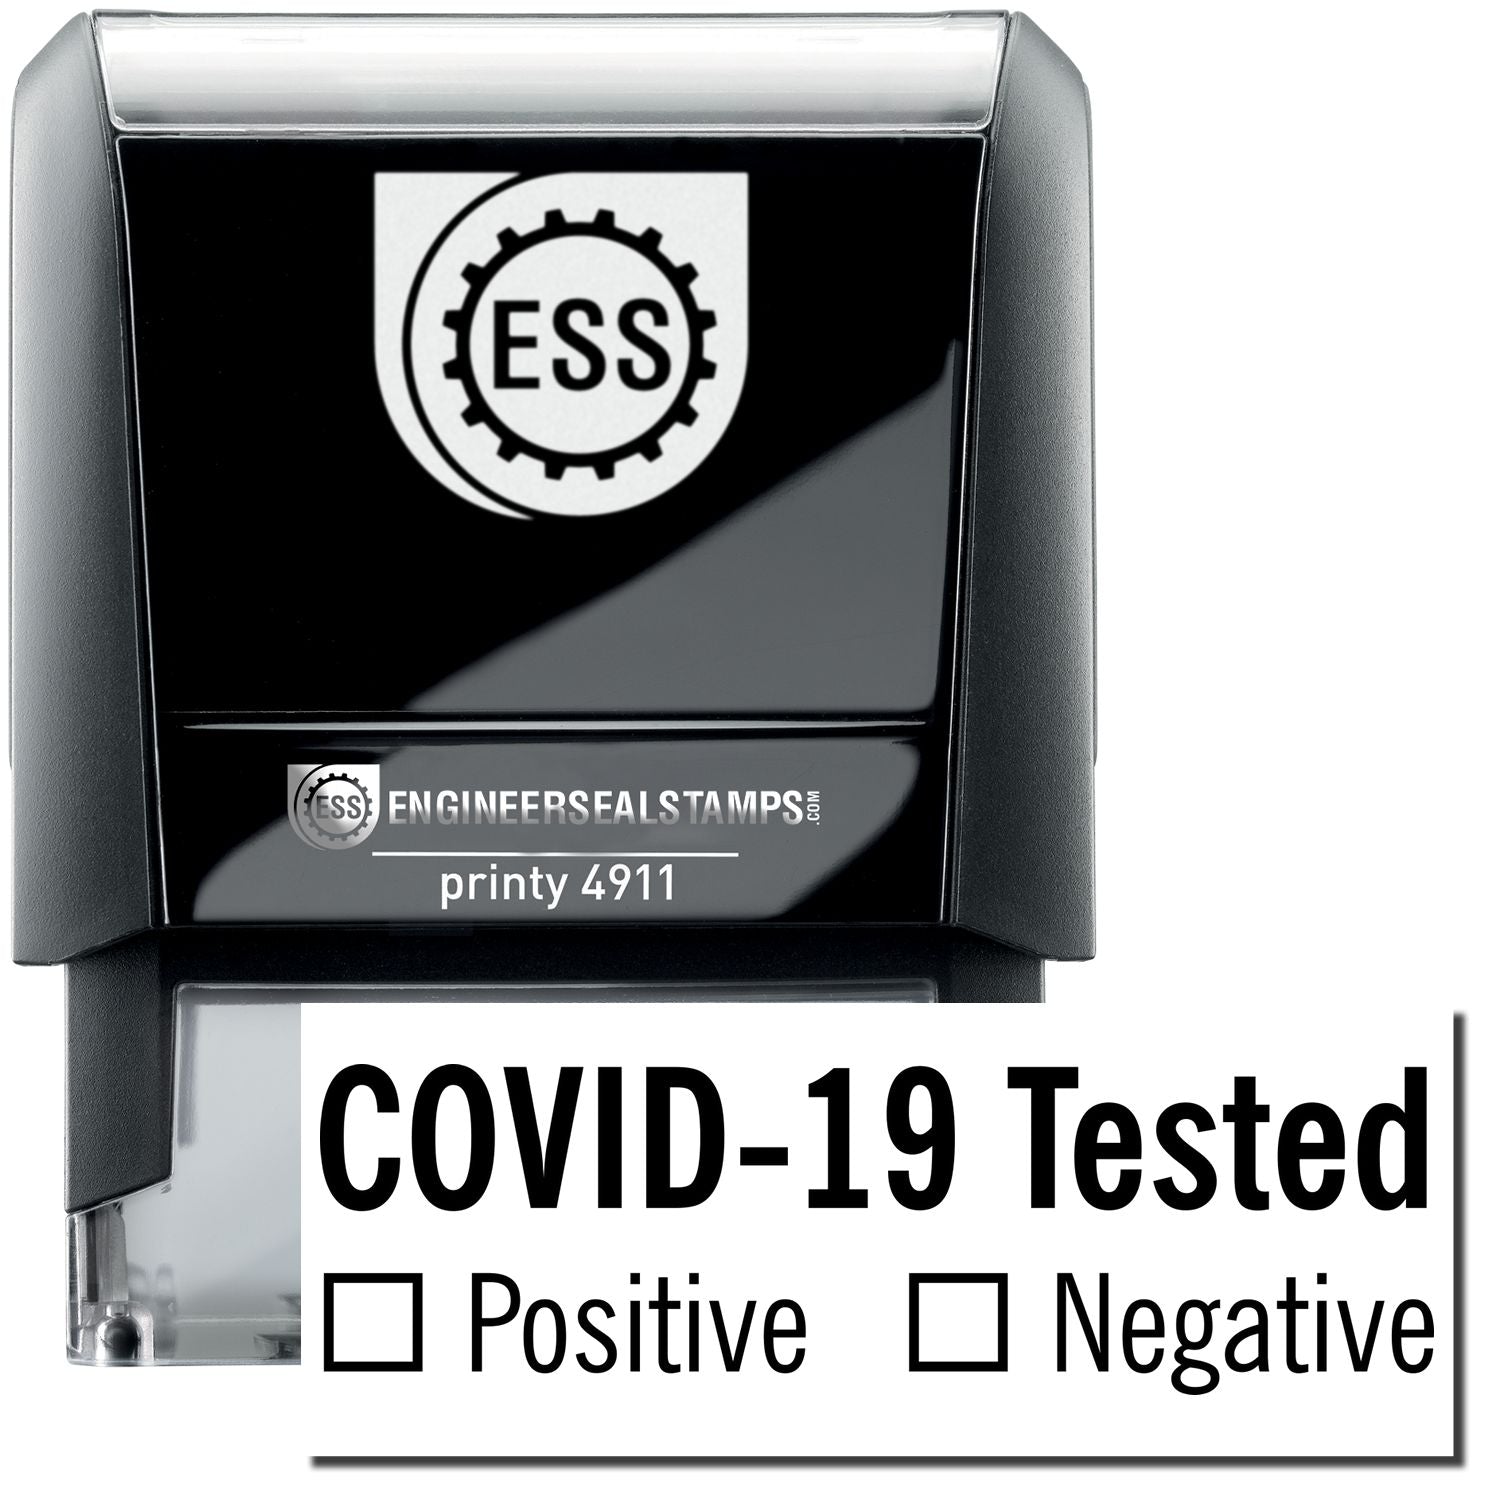 A self-inking stamp with a stamped image showing how the text "COVID-19 Tested" with the words "Positive" and "Negative" underneath with checkboxes (where a box can be checked based on whether a person is positive or negative for the virus) is displayed after stamping.